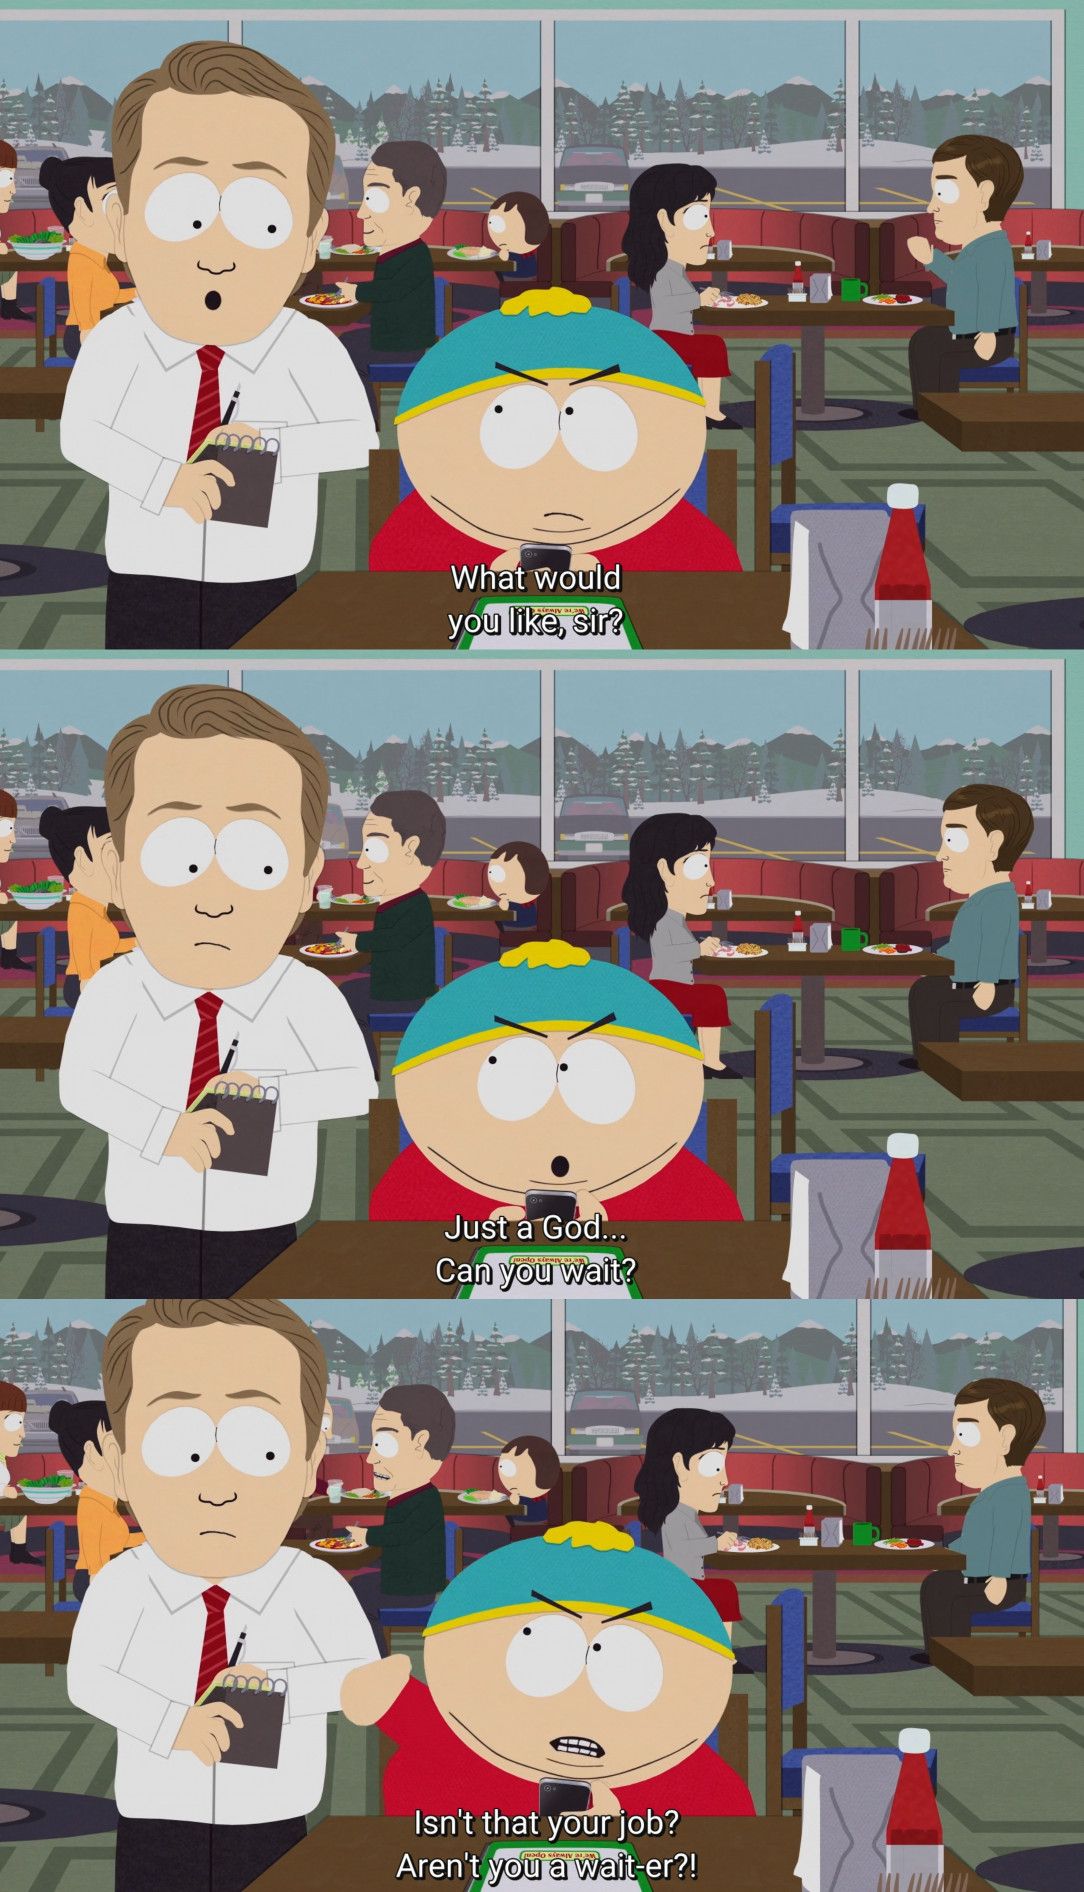 Technically, Cartman is right!